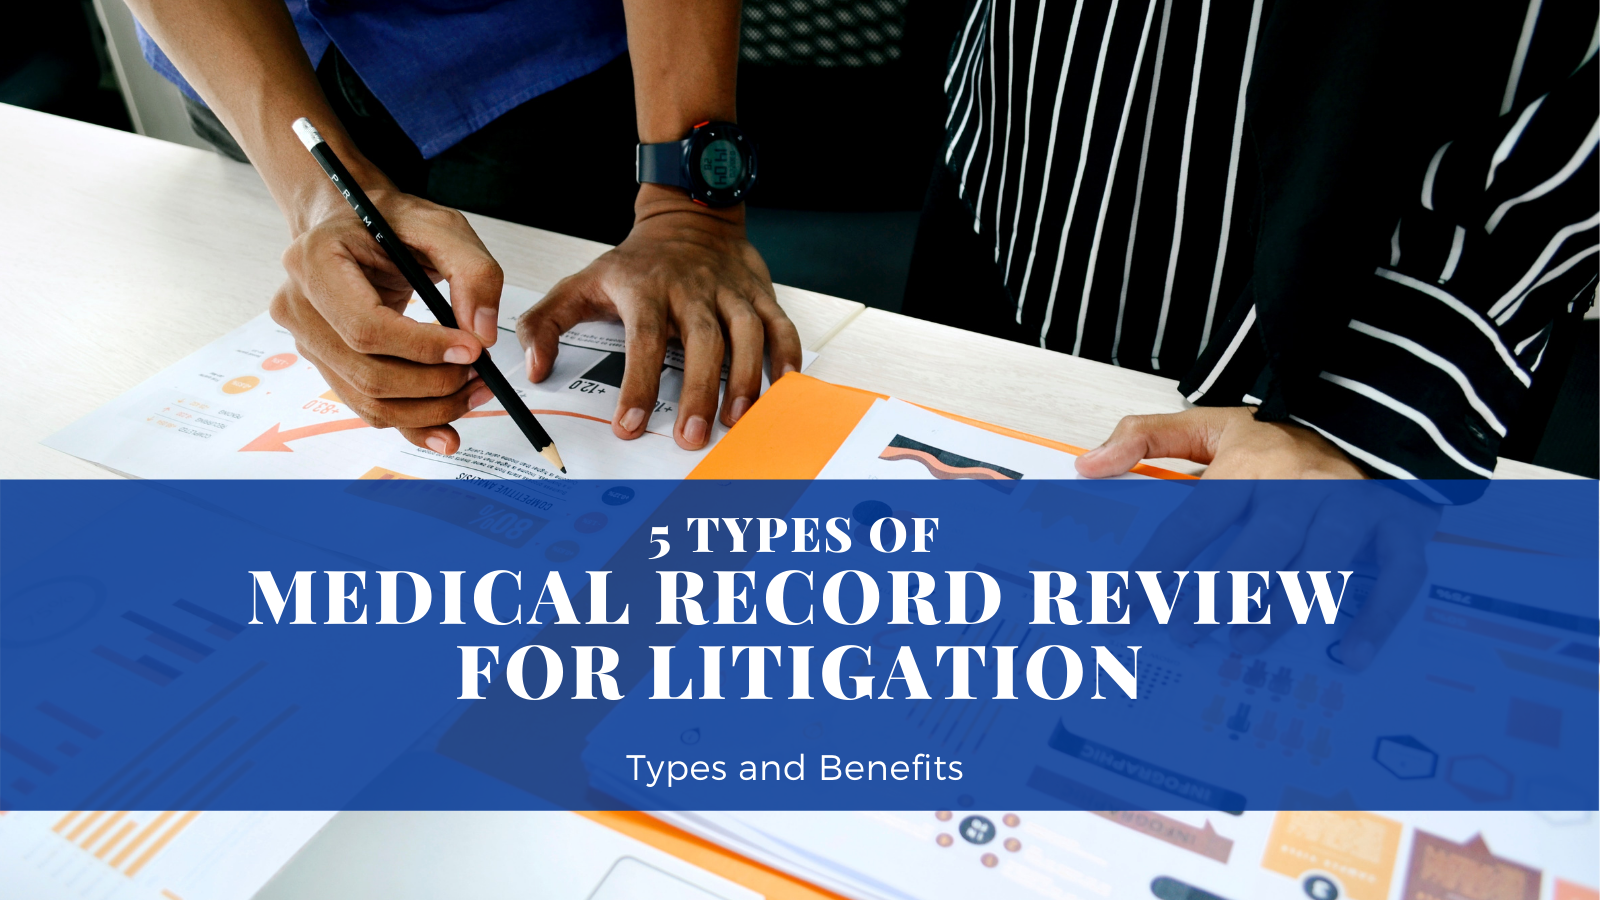 5 Types of Medical Record Review for Litigation